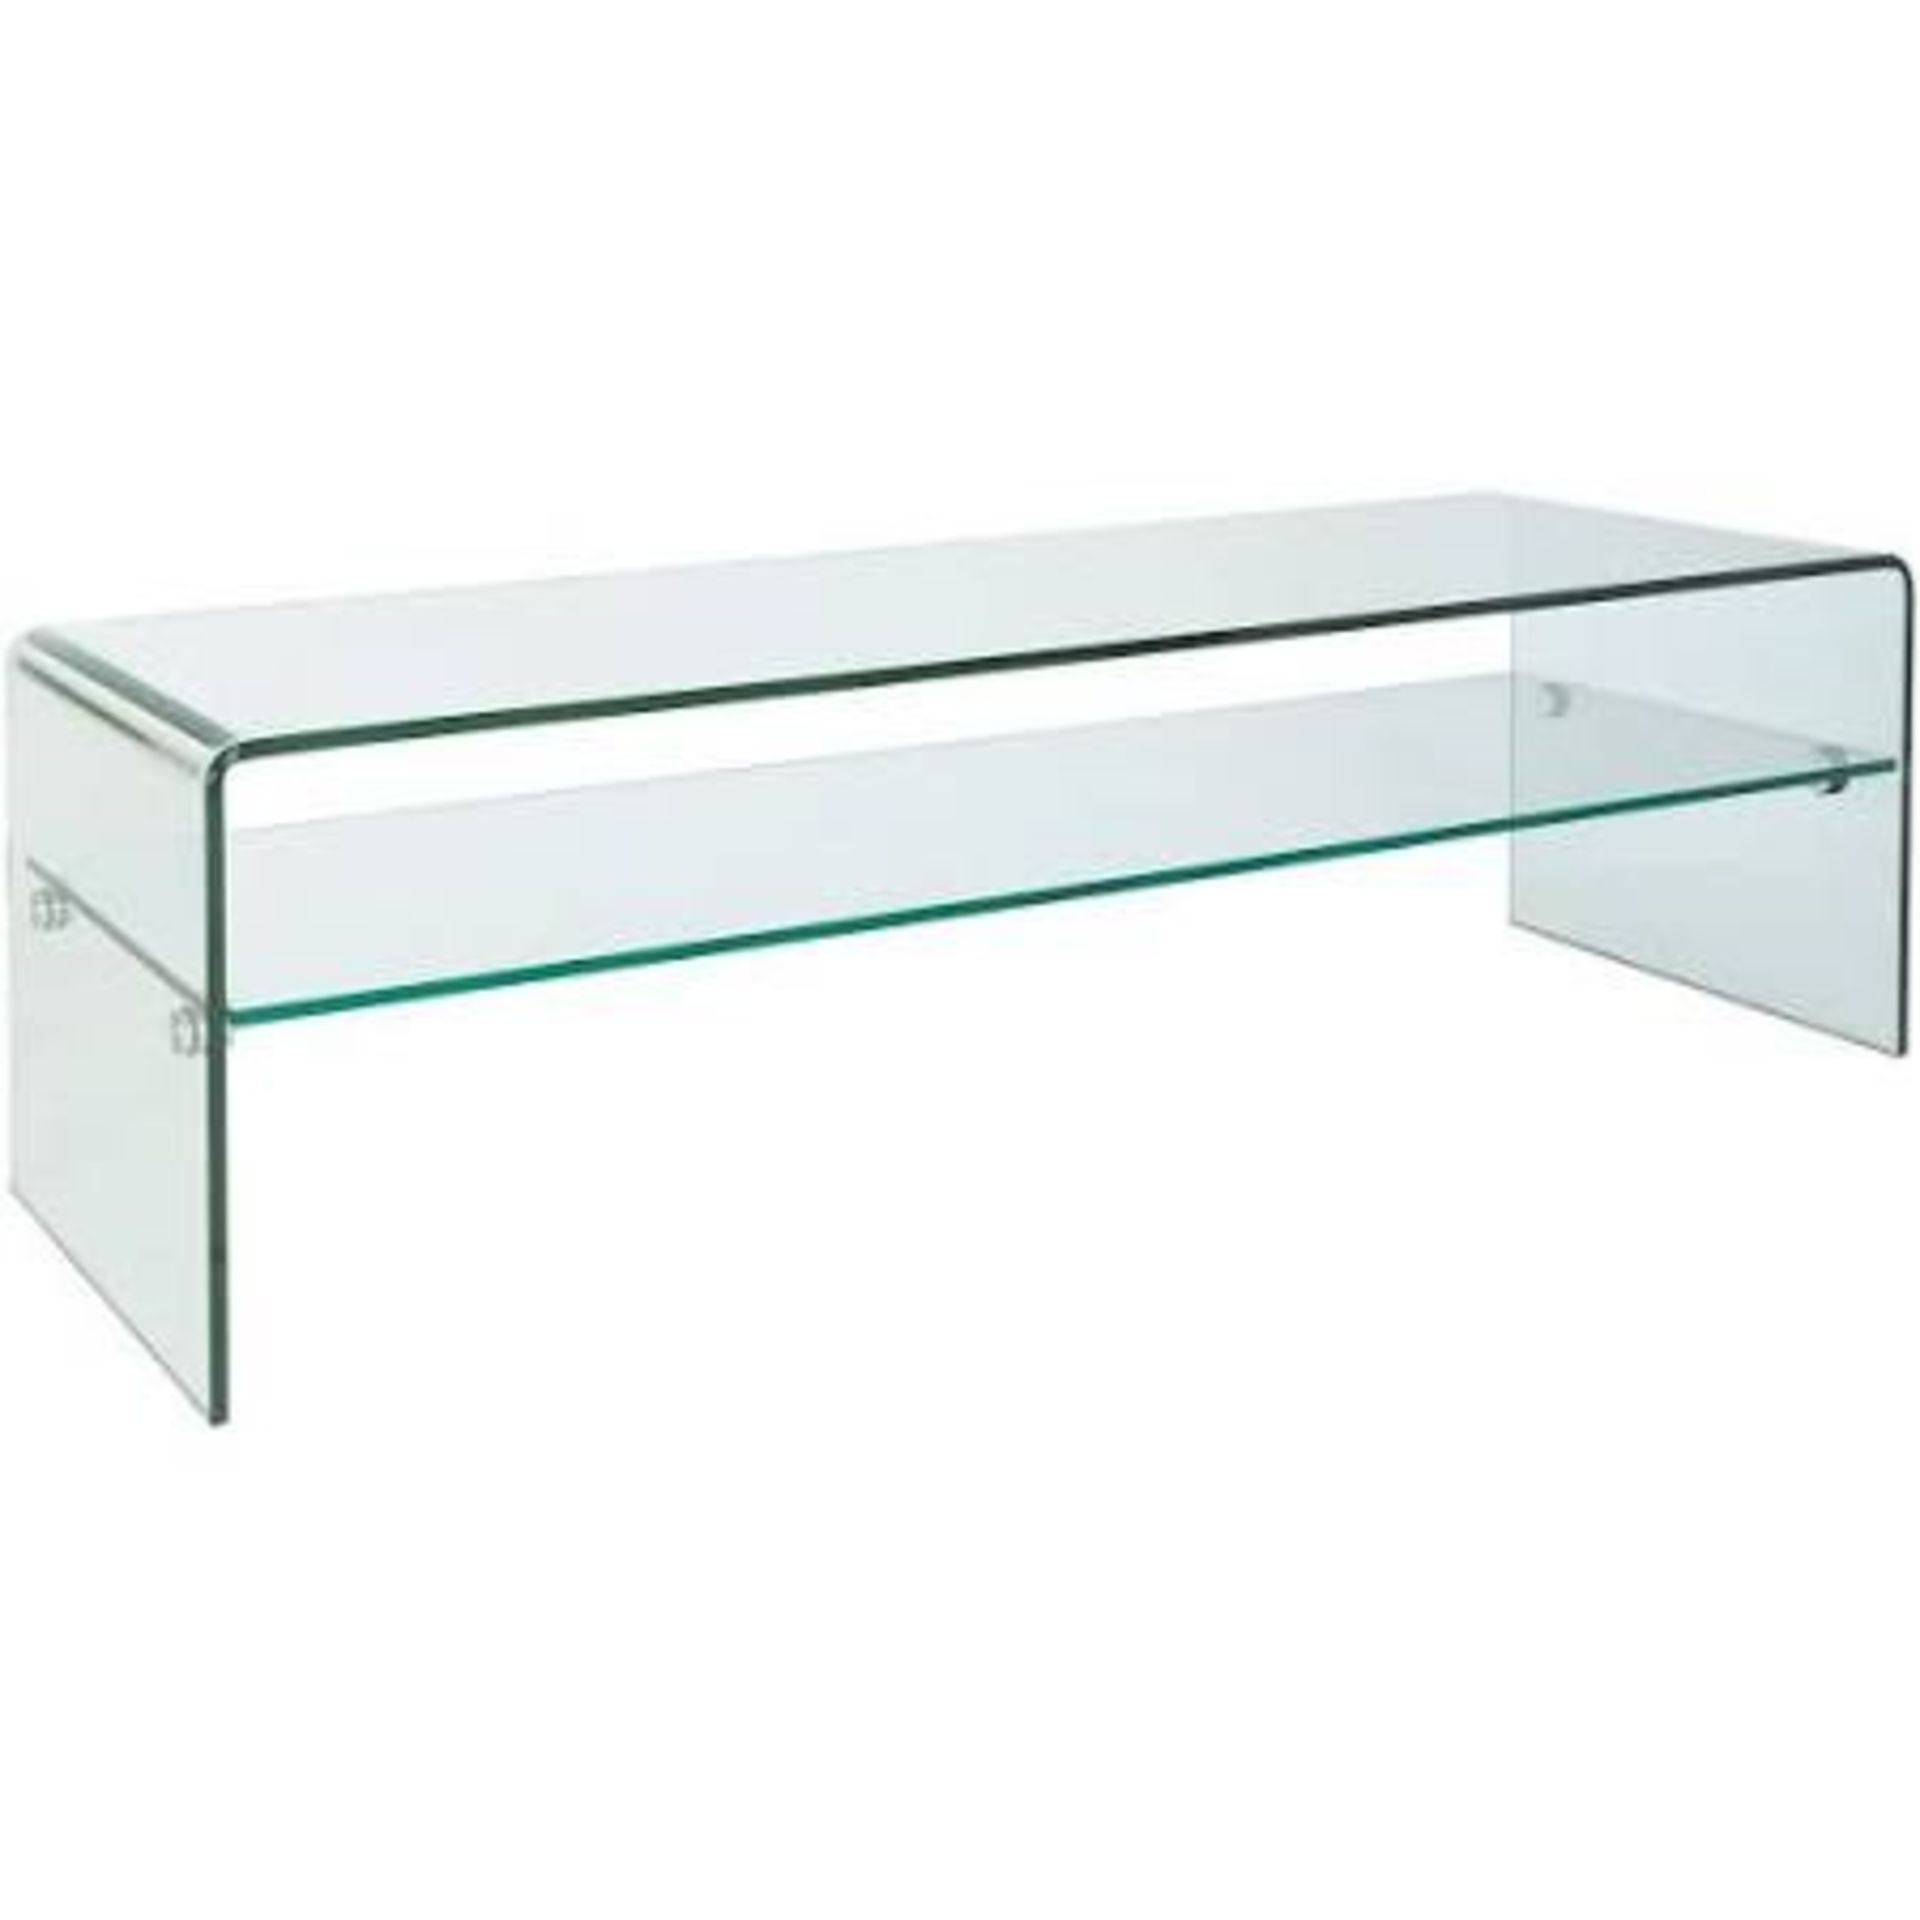 1 GRADE A BOXED HABITAT GALA TEMPERED GLASS TV STAND WITH SHELF / NO VISIBLE DAMAGE / RRP £350.00 (